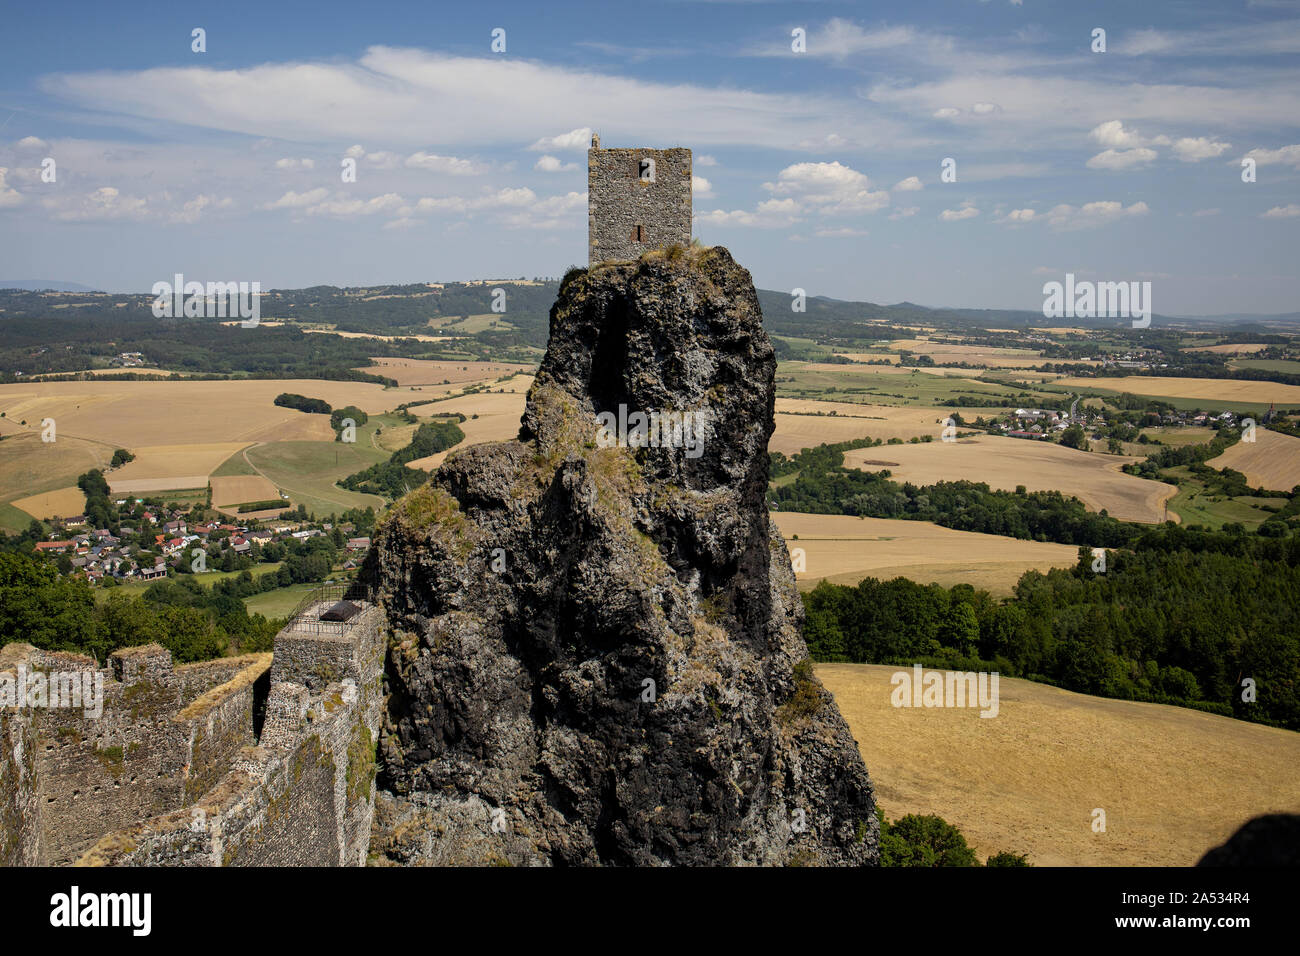 Old castle on the hill, Hrad Trosky, castle in the Czech Republic, Bohemian Paradise Stock Photo